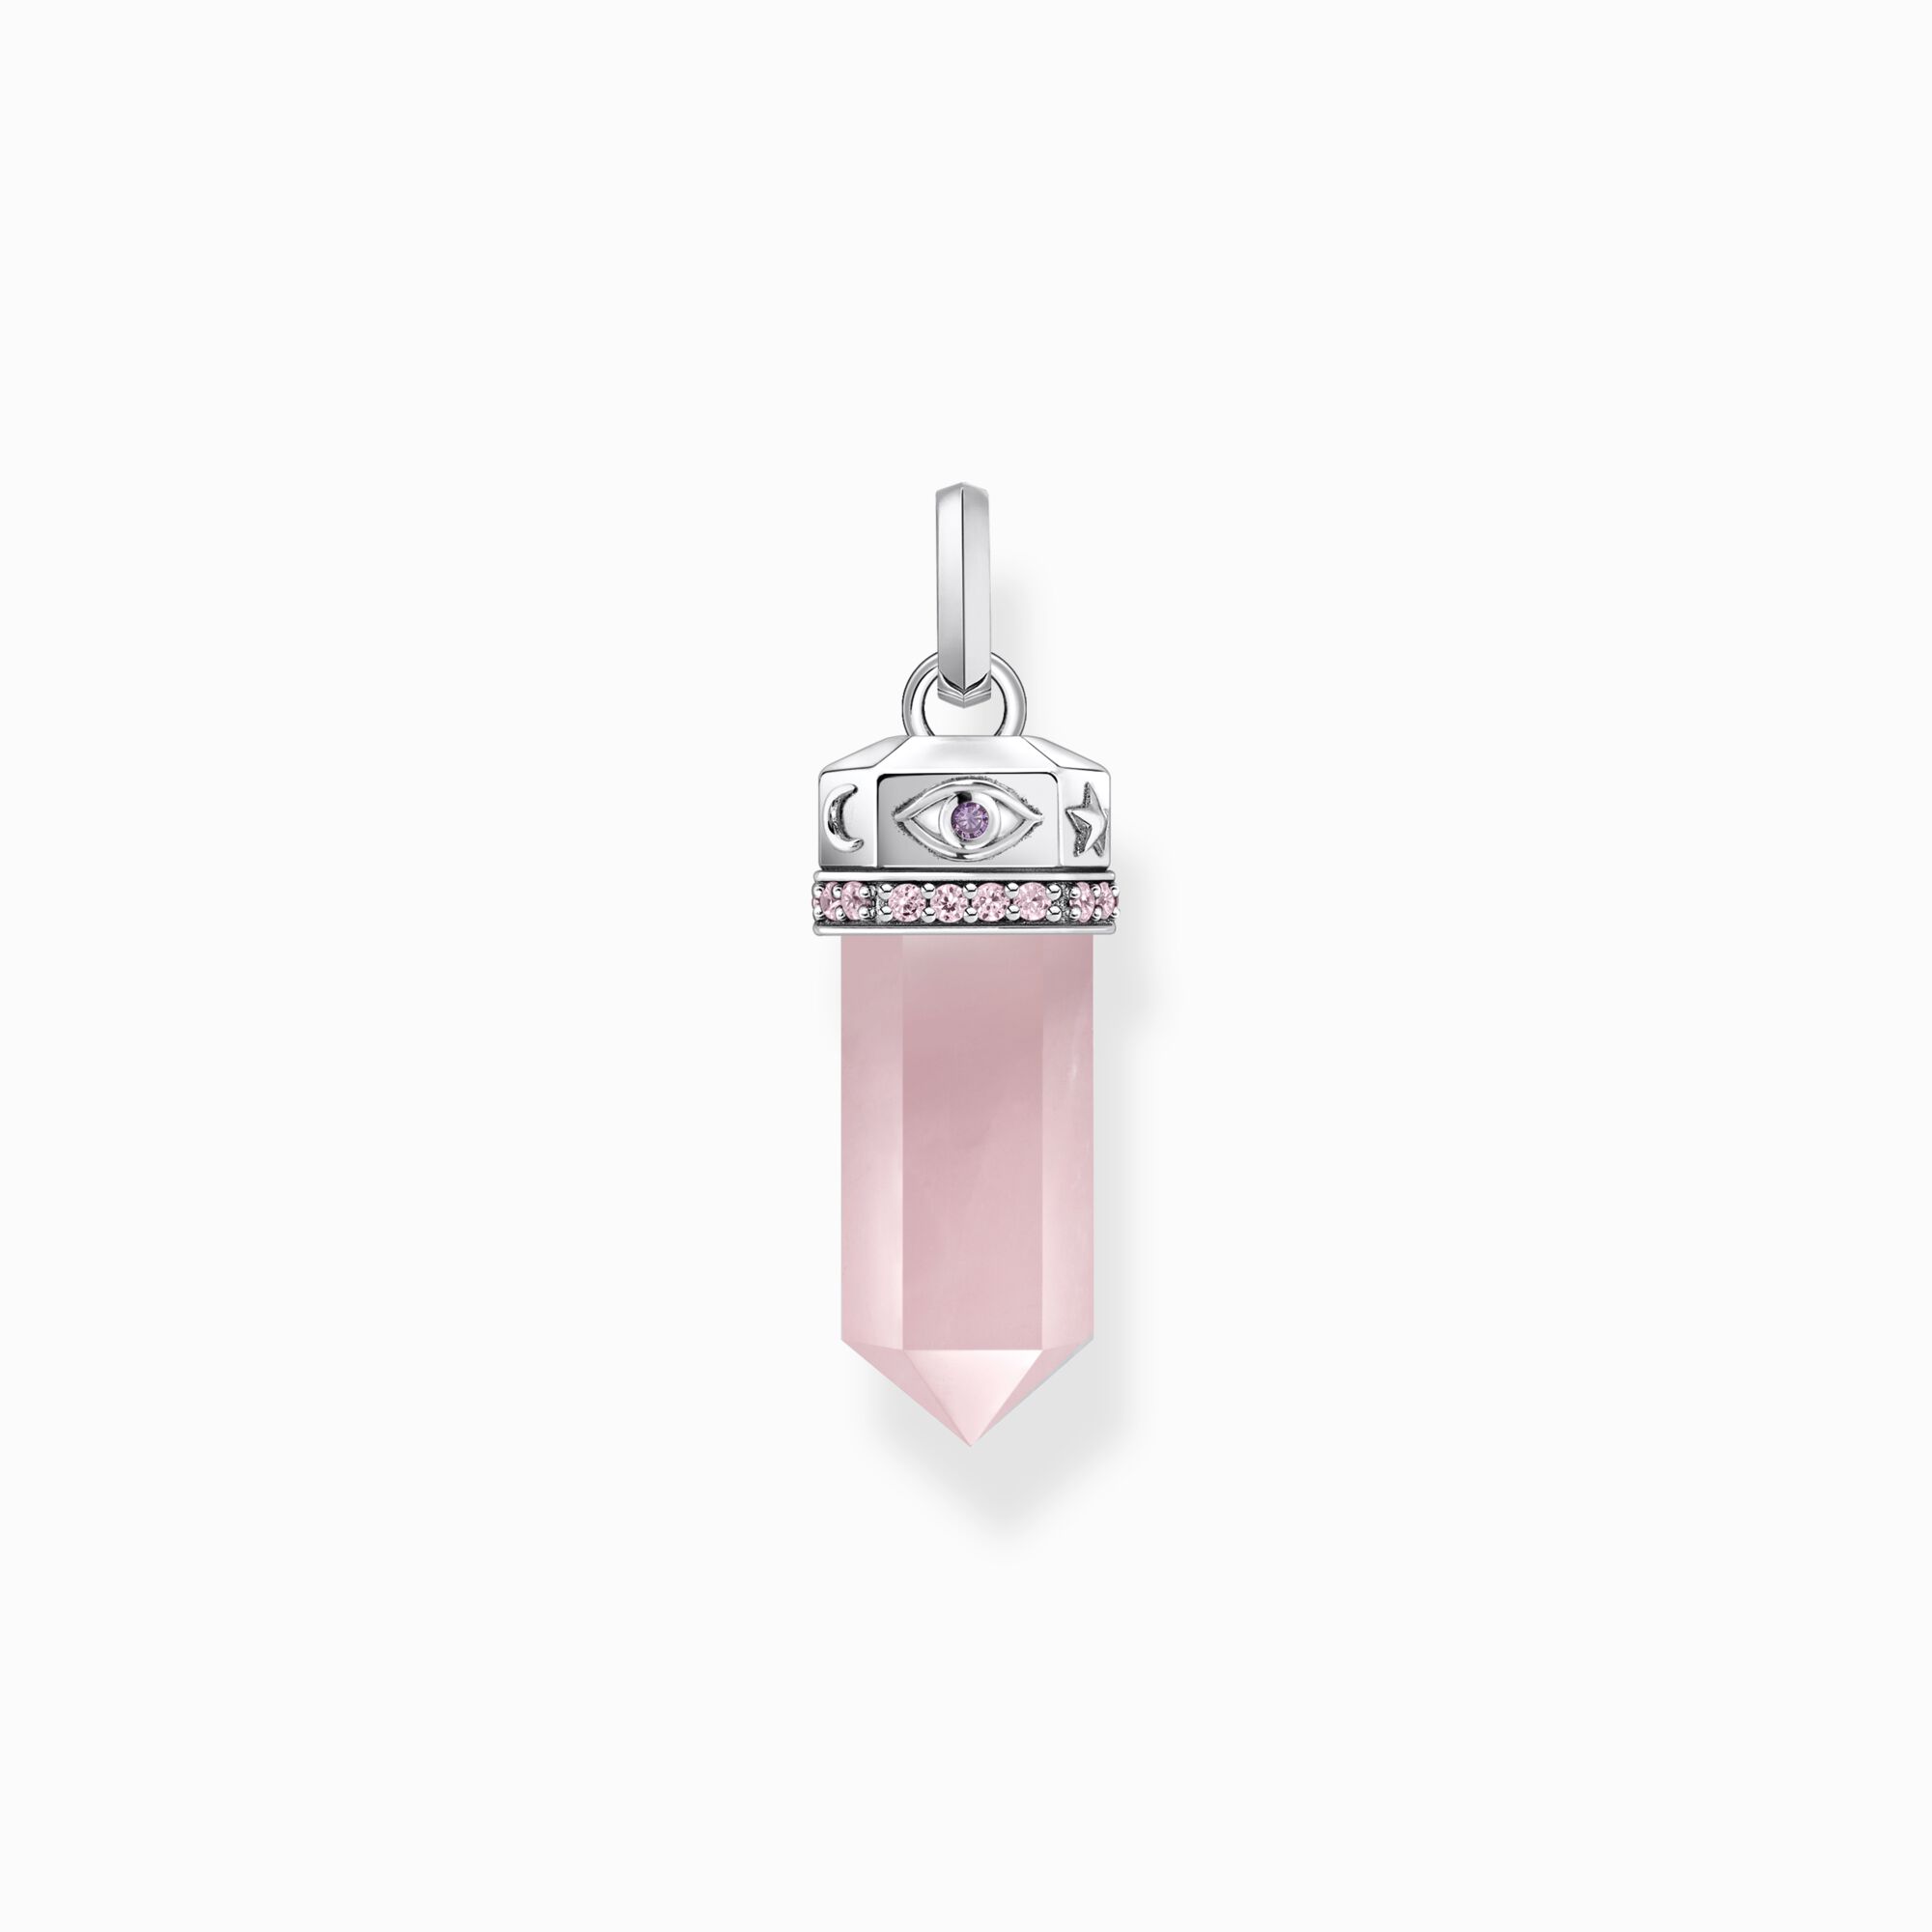 Silver hexagonal pendant with rose quartz from the  collection in the THOMAS SABO online store